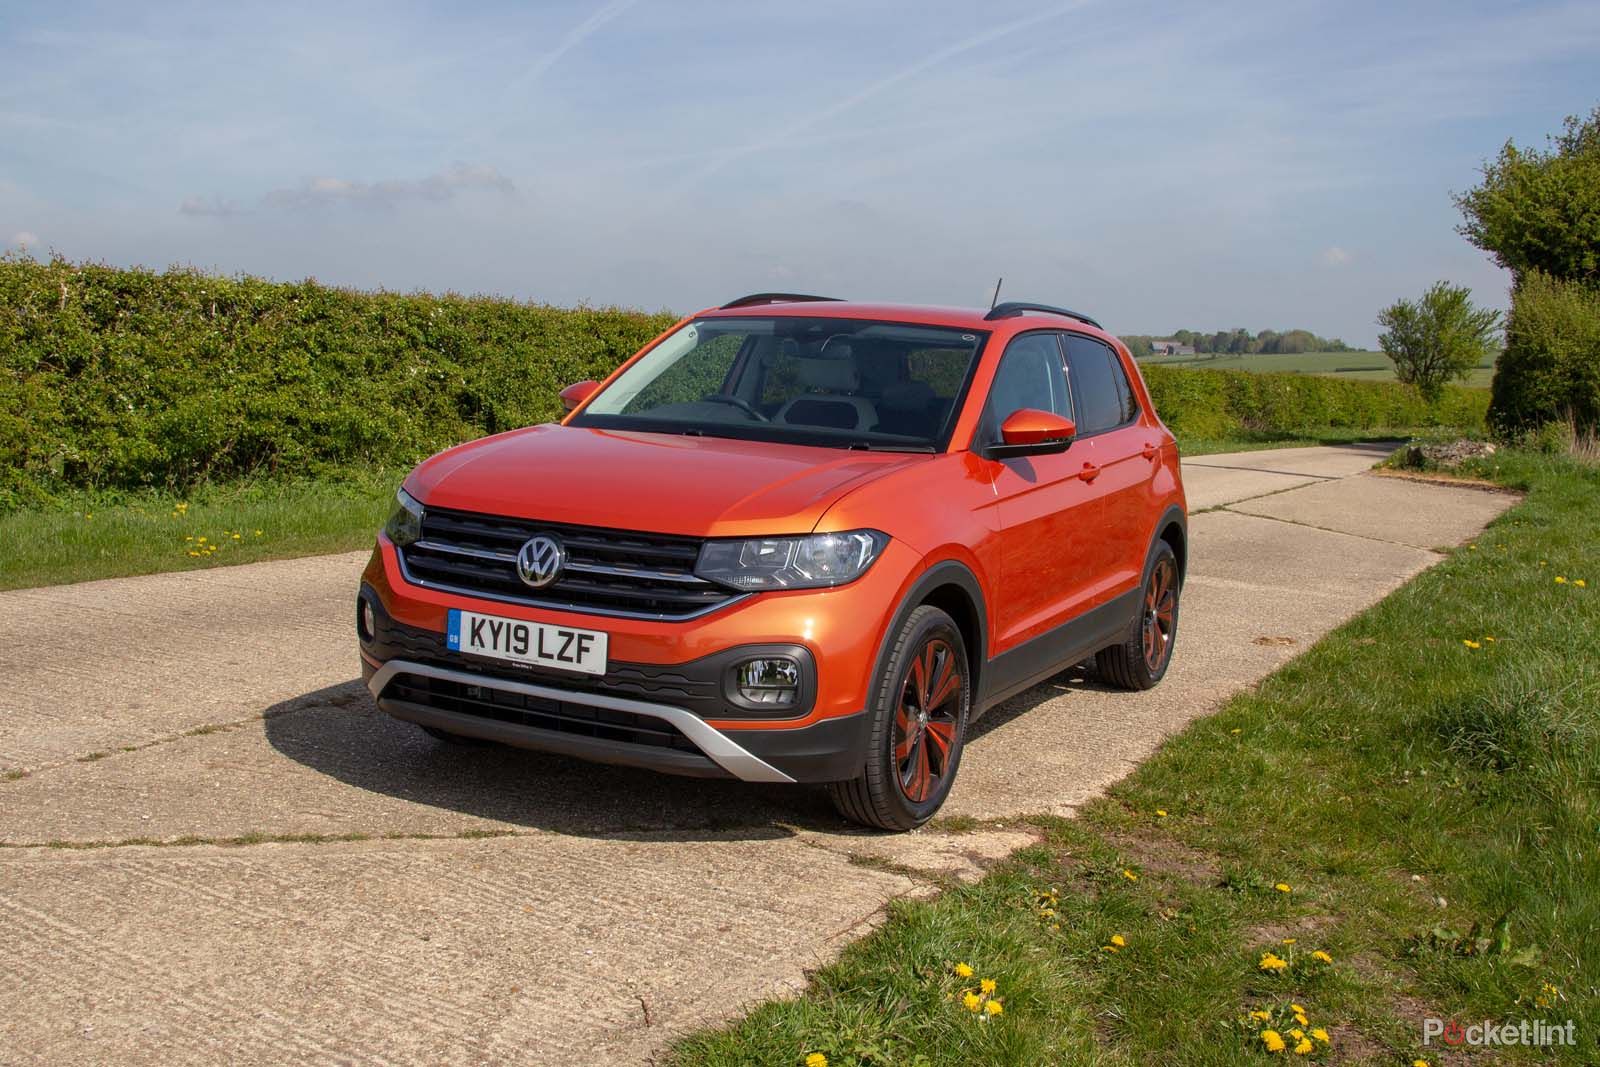 VW T-Cross review: Compact SUV done the right way